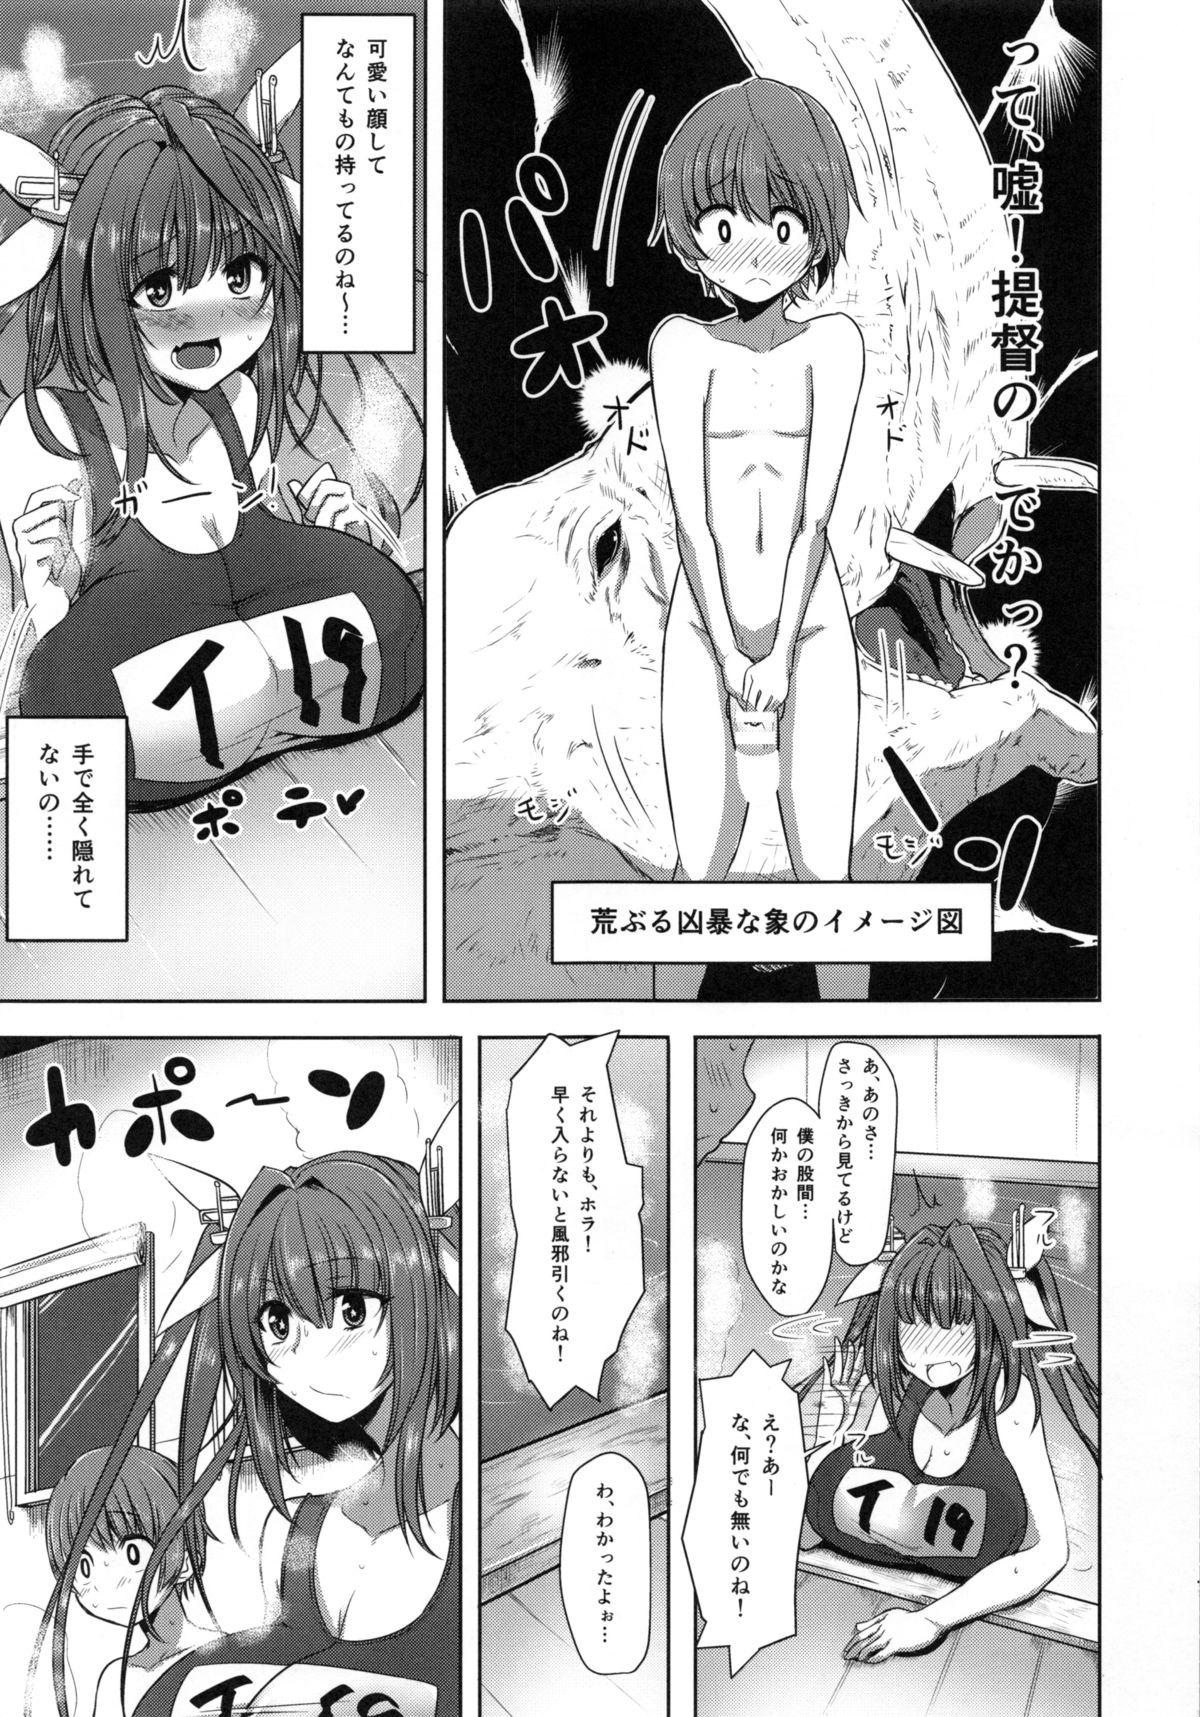 Porn Blow Jobs I-19 to Icchau?? - Kantai collection Camsex - Page 6